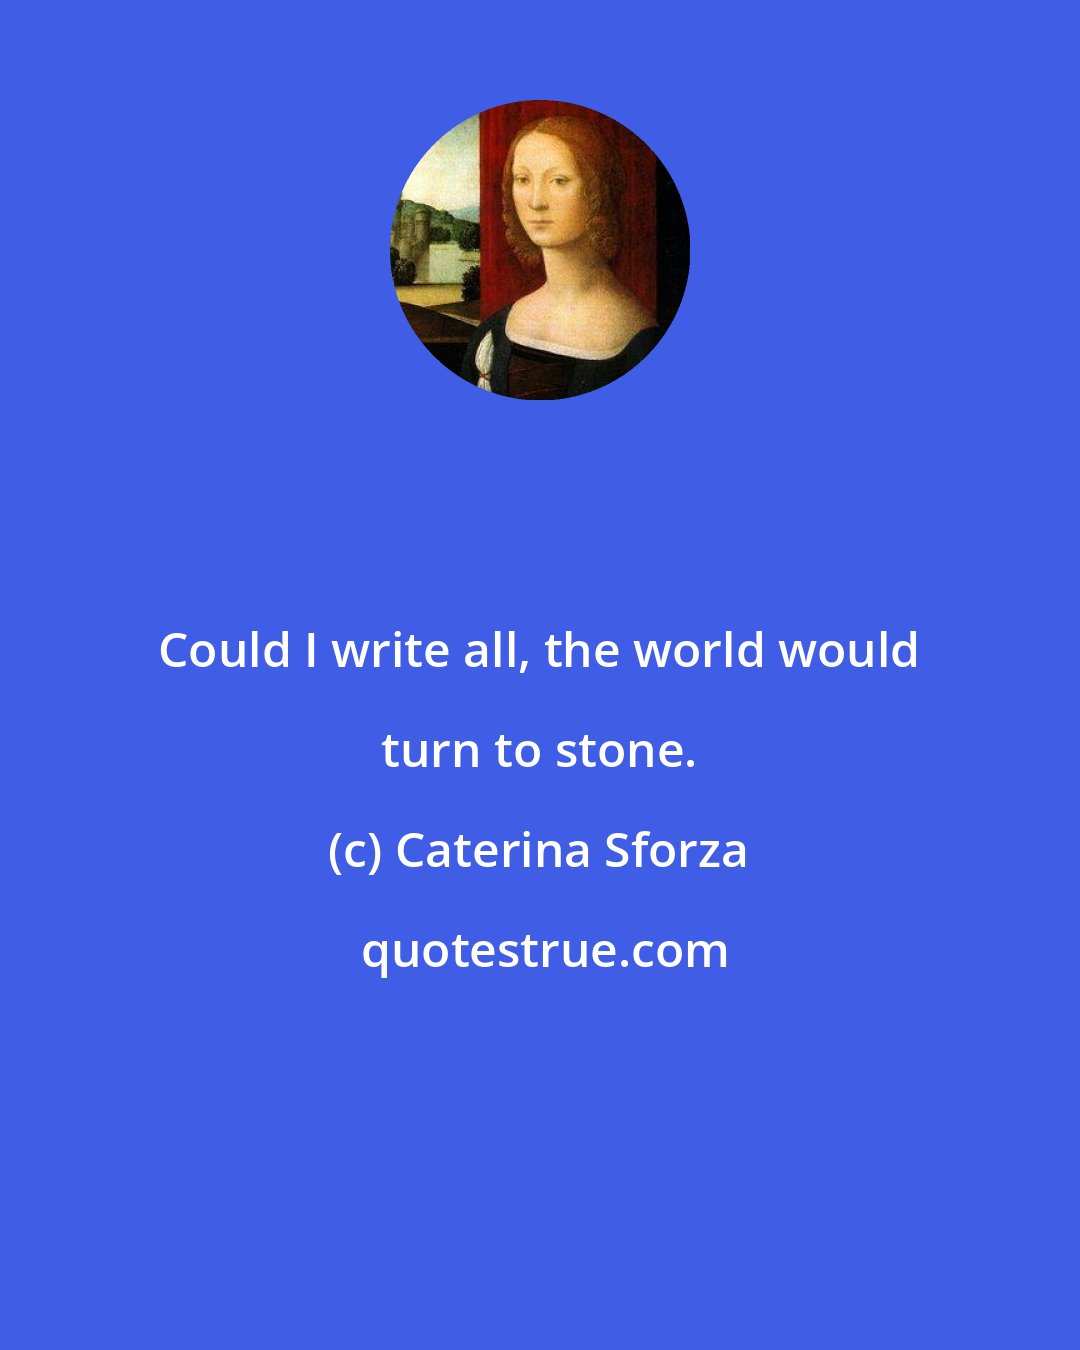 Caterina Sforza: Could I write all, the world would turn to stone.